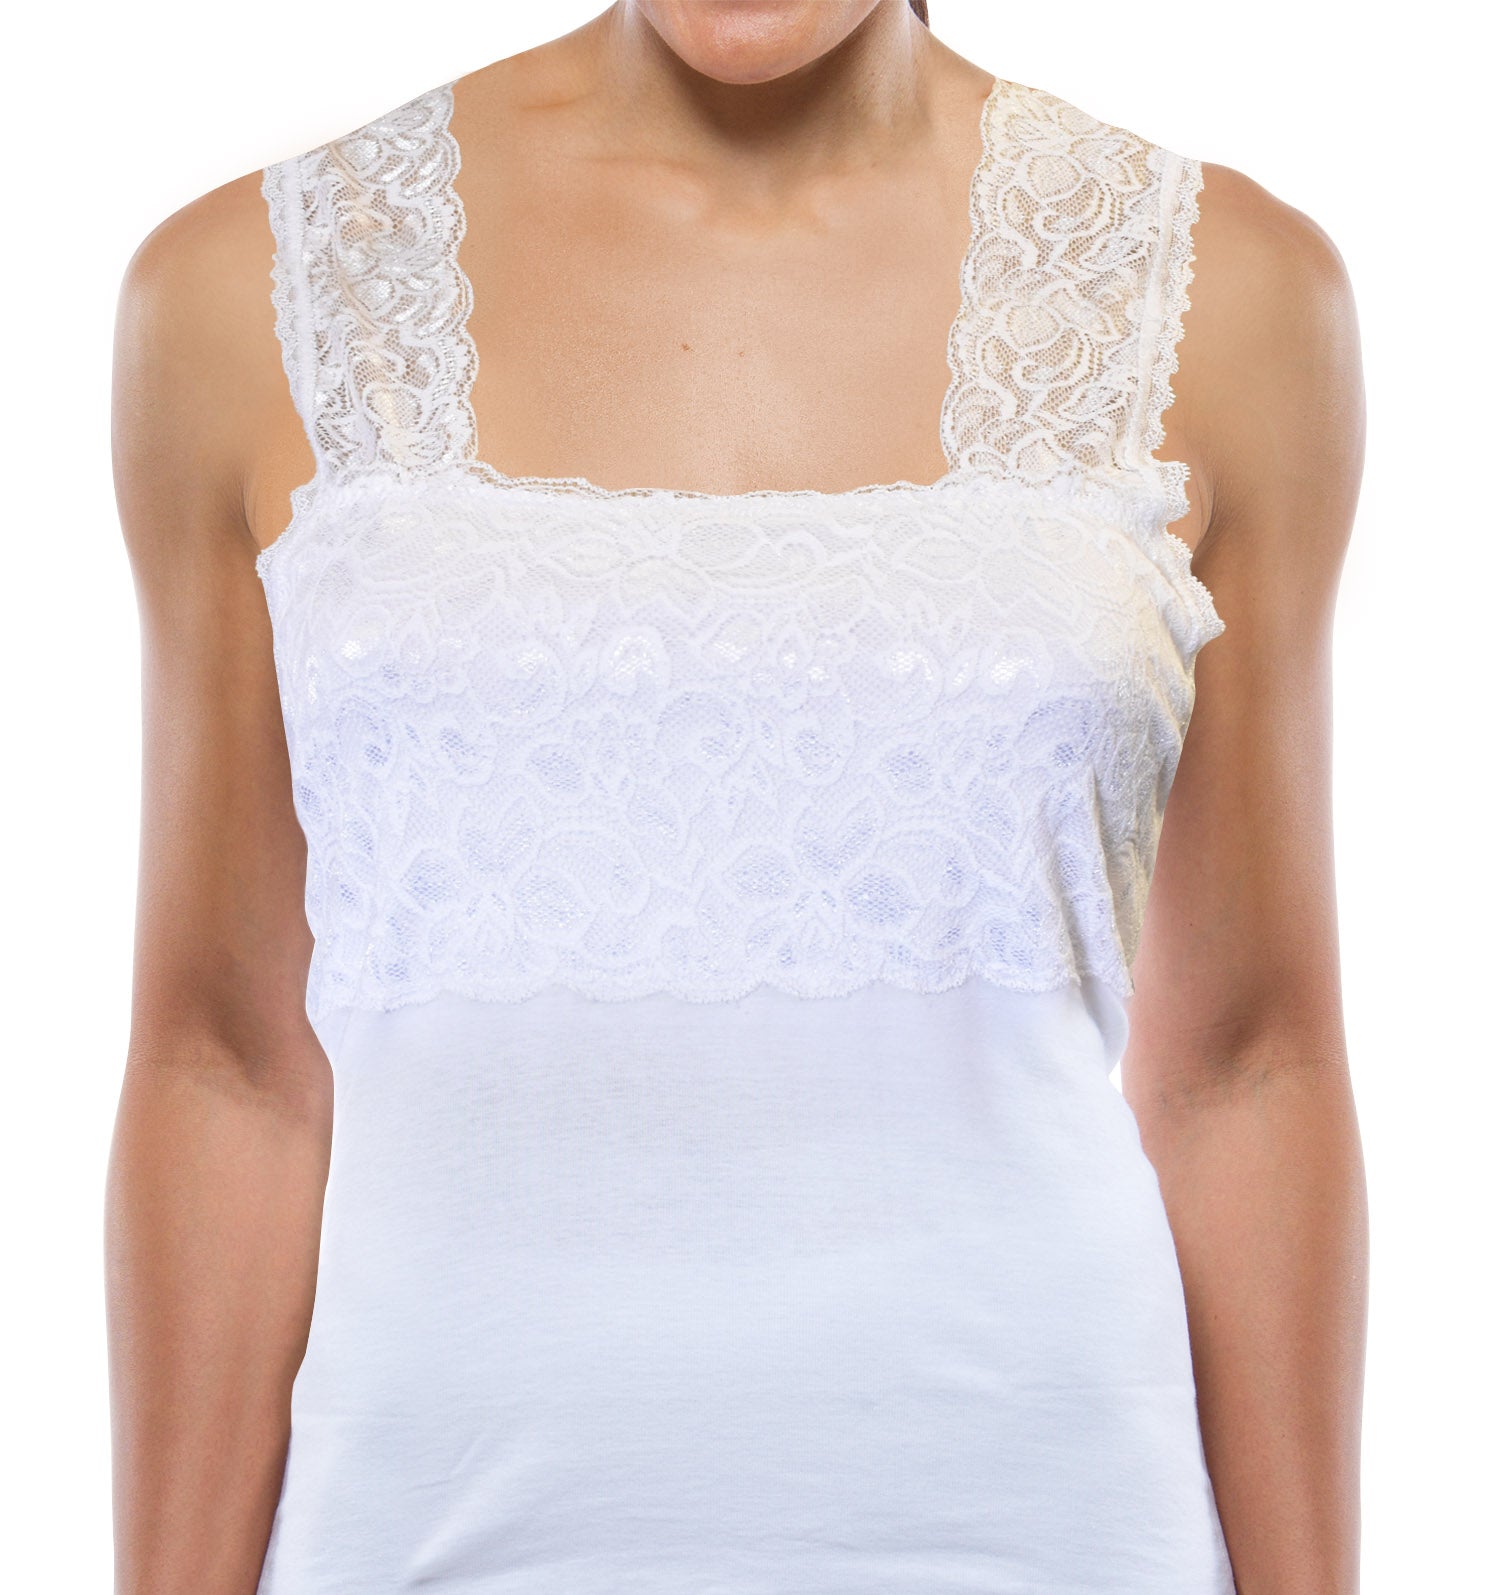 Lace Overlay Cami